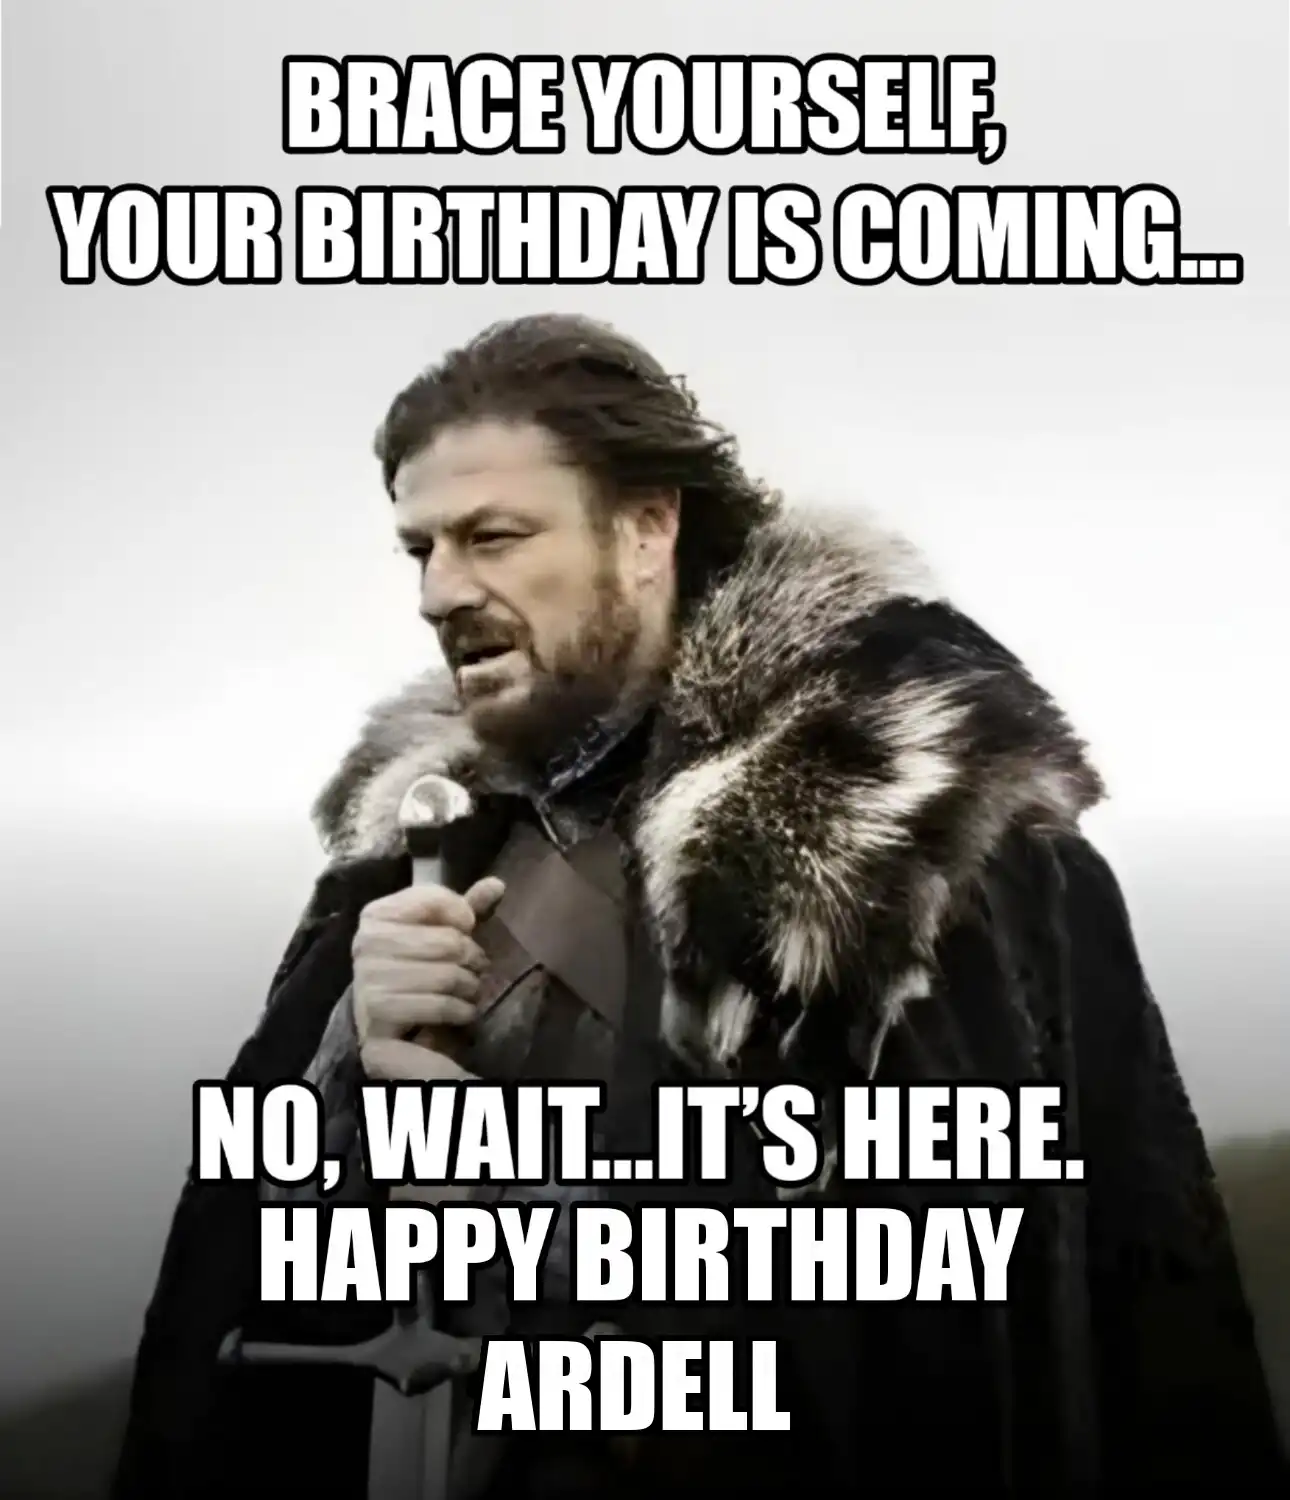 Happy Birthday Ardell Brace Yourself Your Birthday Is Coming Meme